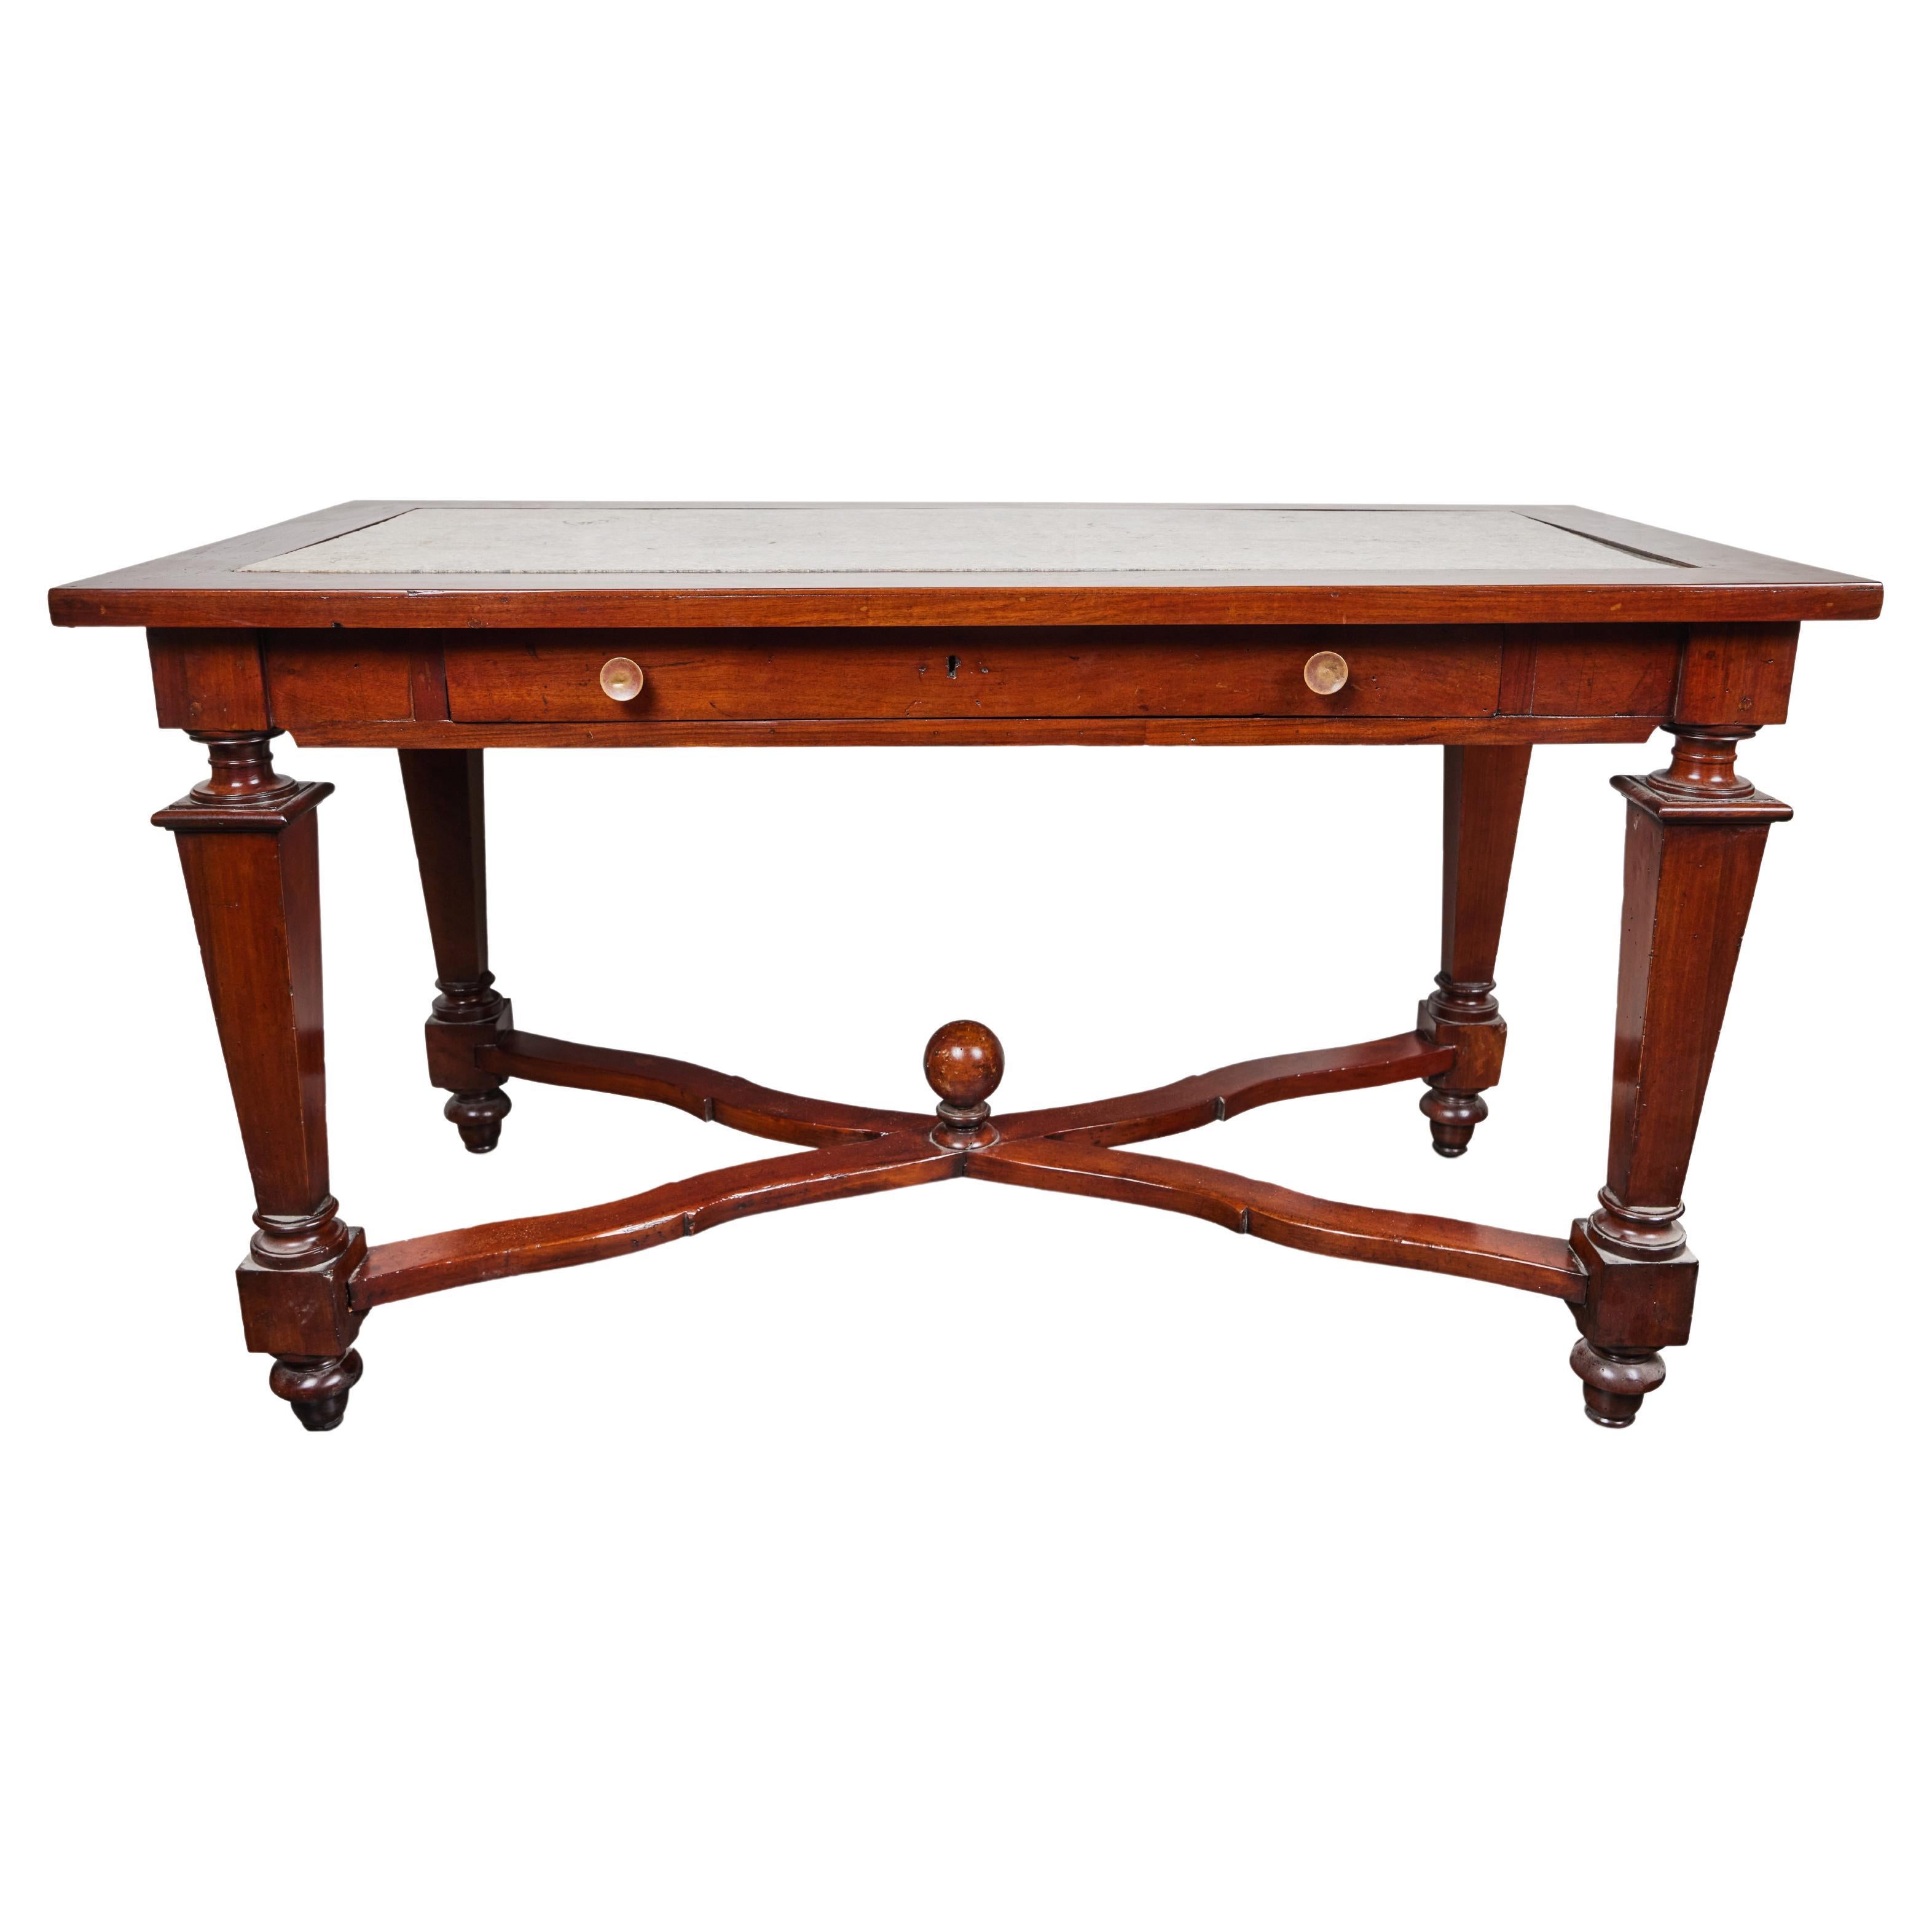 c. 1780 Tuscan Console Table